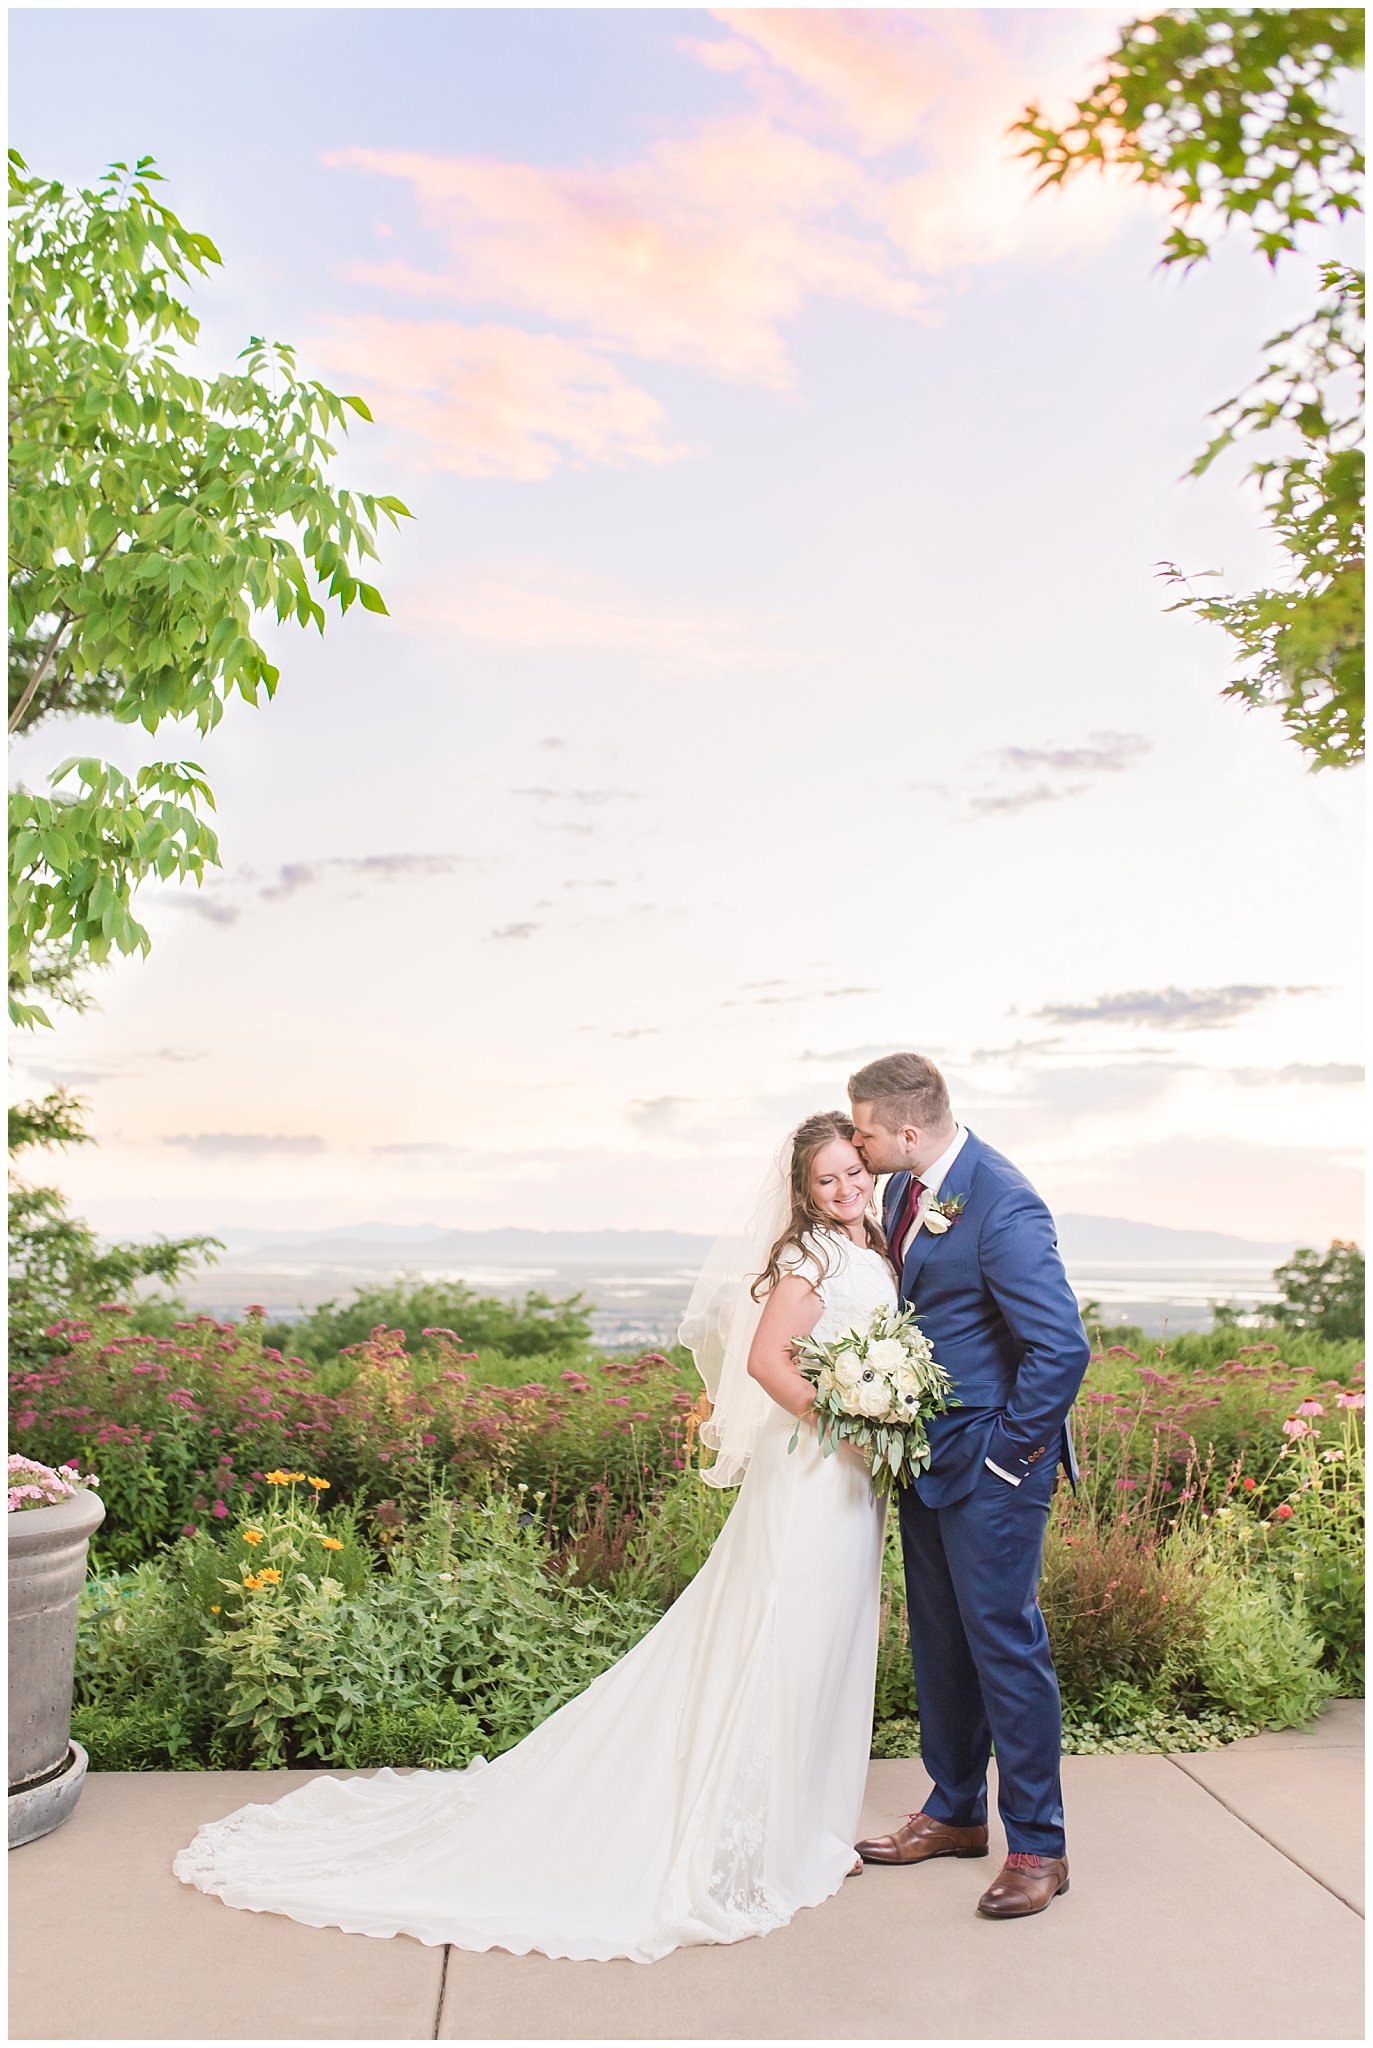 Bride and groom at sunset at the Bountiful Temple | Top Utah Wedding and Couples Photos 2019 | Jessie and Dallin Photography